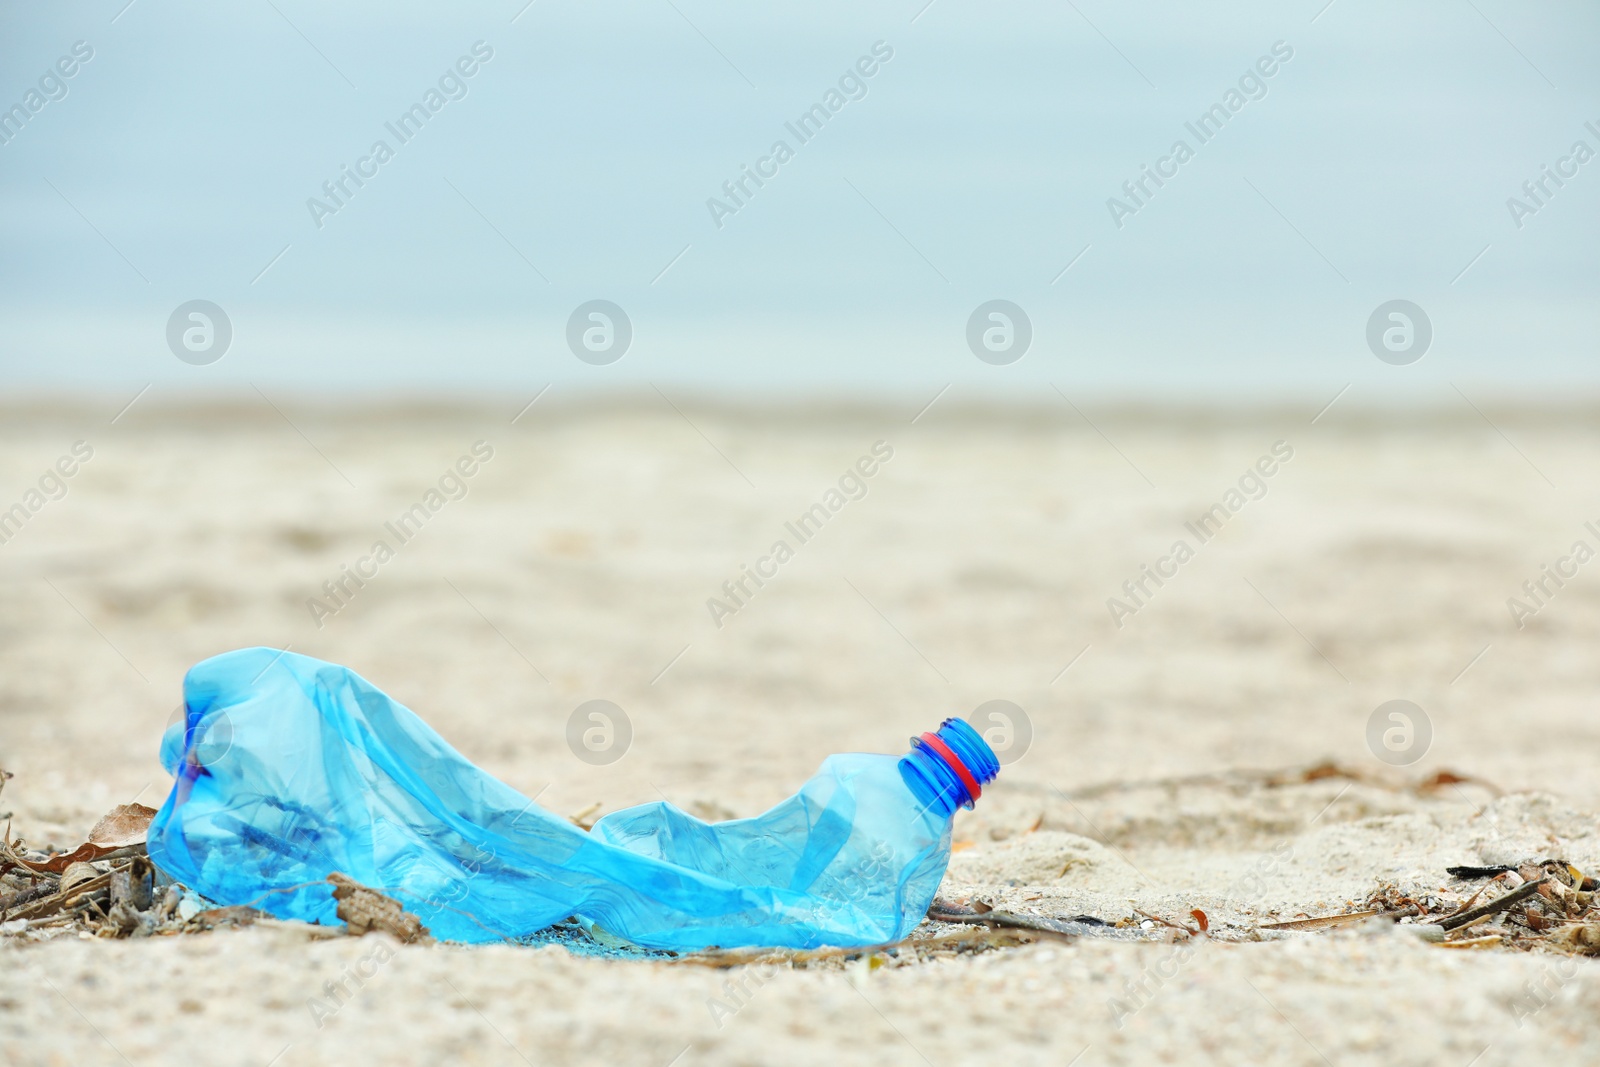 Photo of Used plastic bottle on beach, space for text. Recycling problem